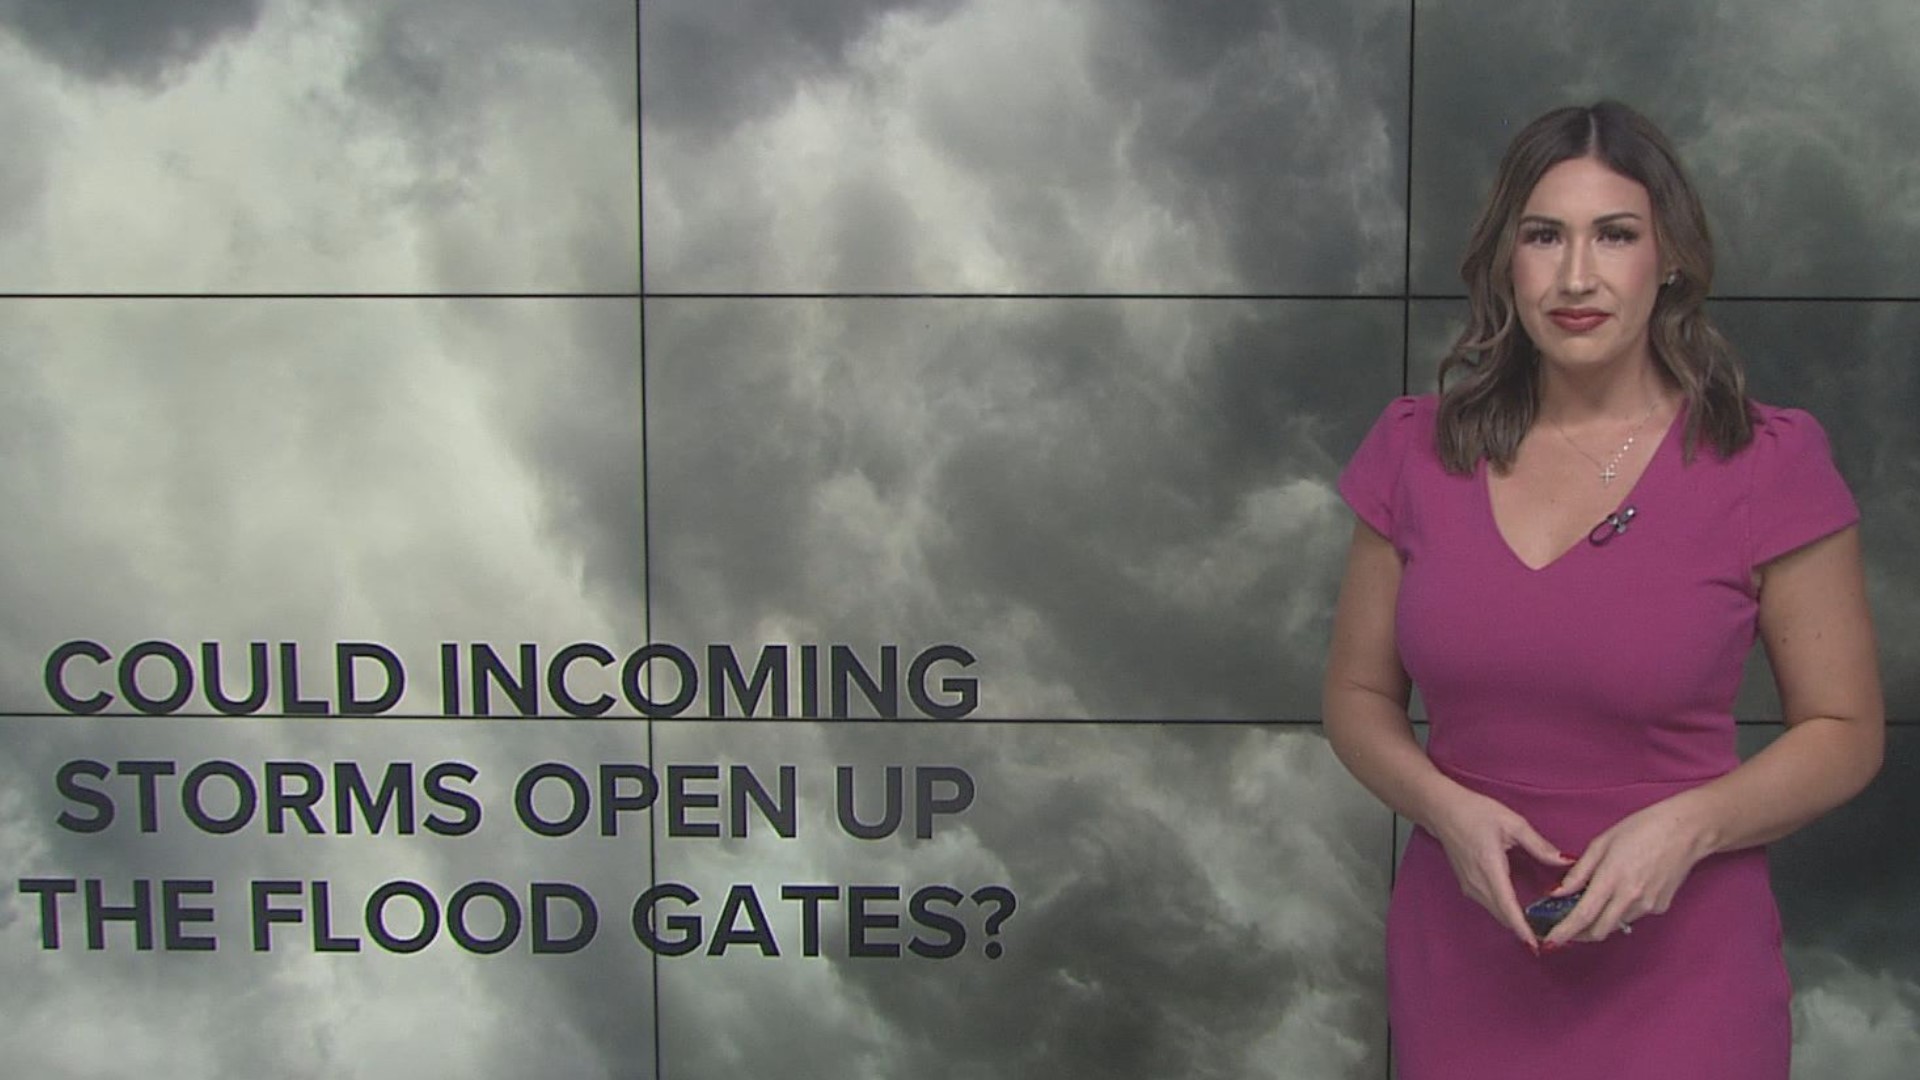 ABC10's Carley Gomez tracks atmospheric river storms that could possibly open up the flood gates in Northern California.